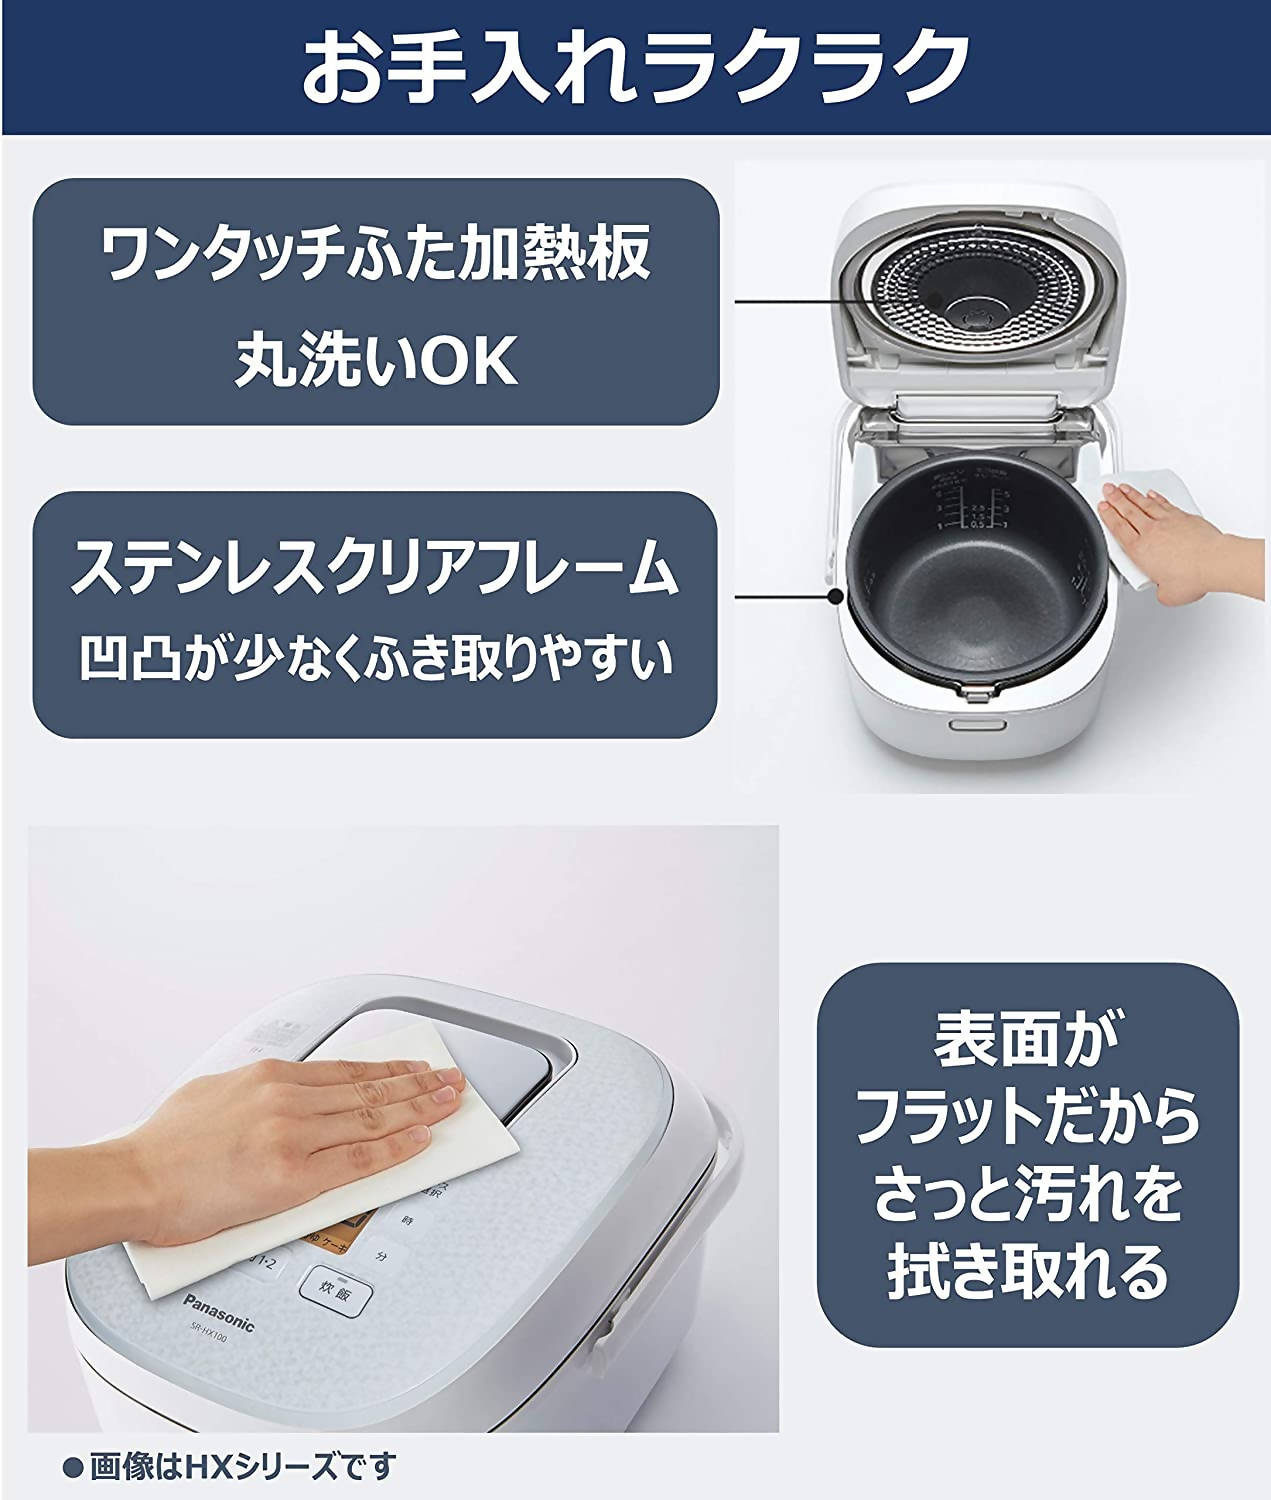 Panasonic SR-HB100-W 5-Stage IH (Induction Heating) Rice Cooker